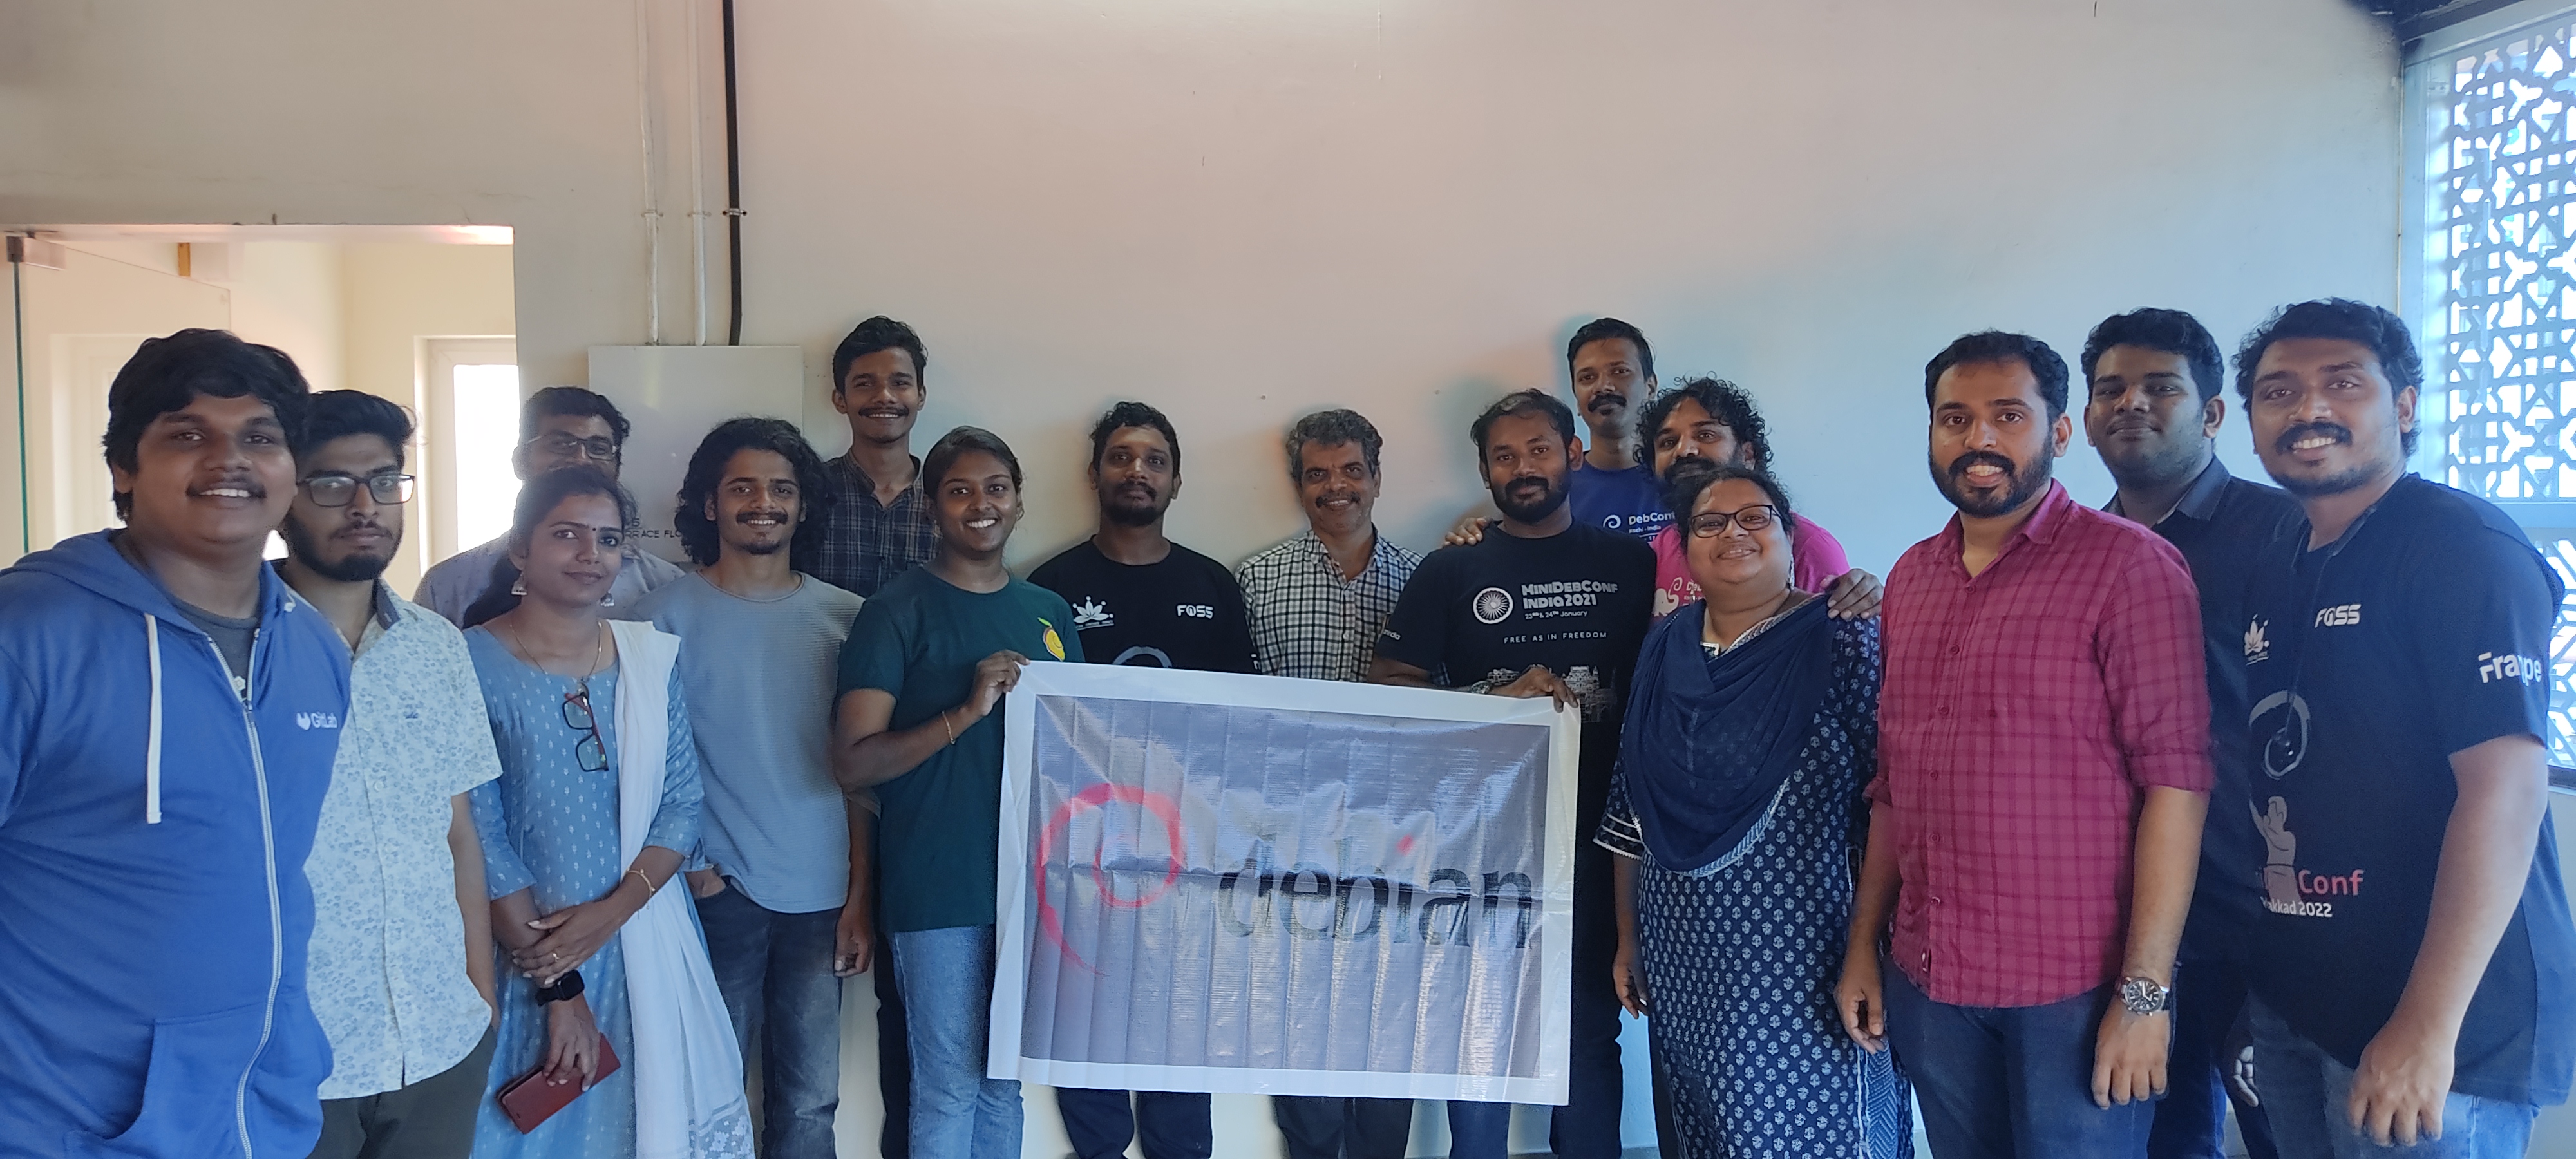 Group photo of attendees with Debian banner